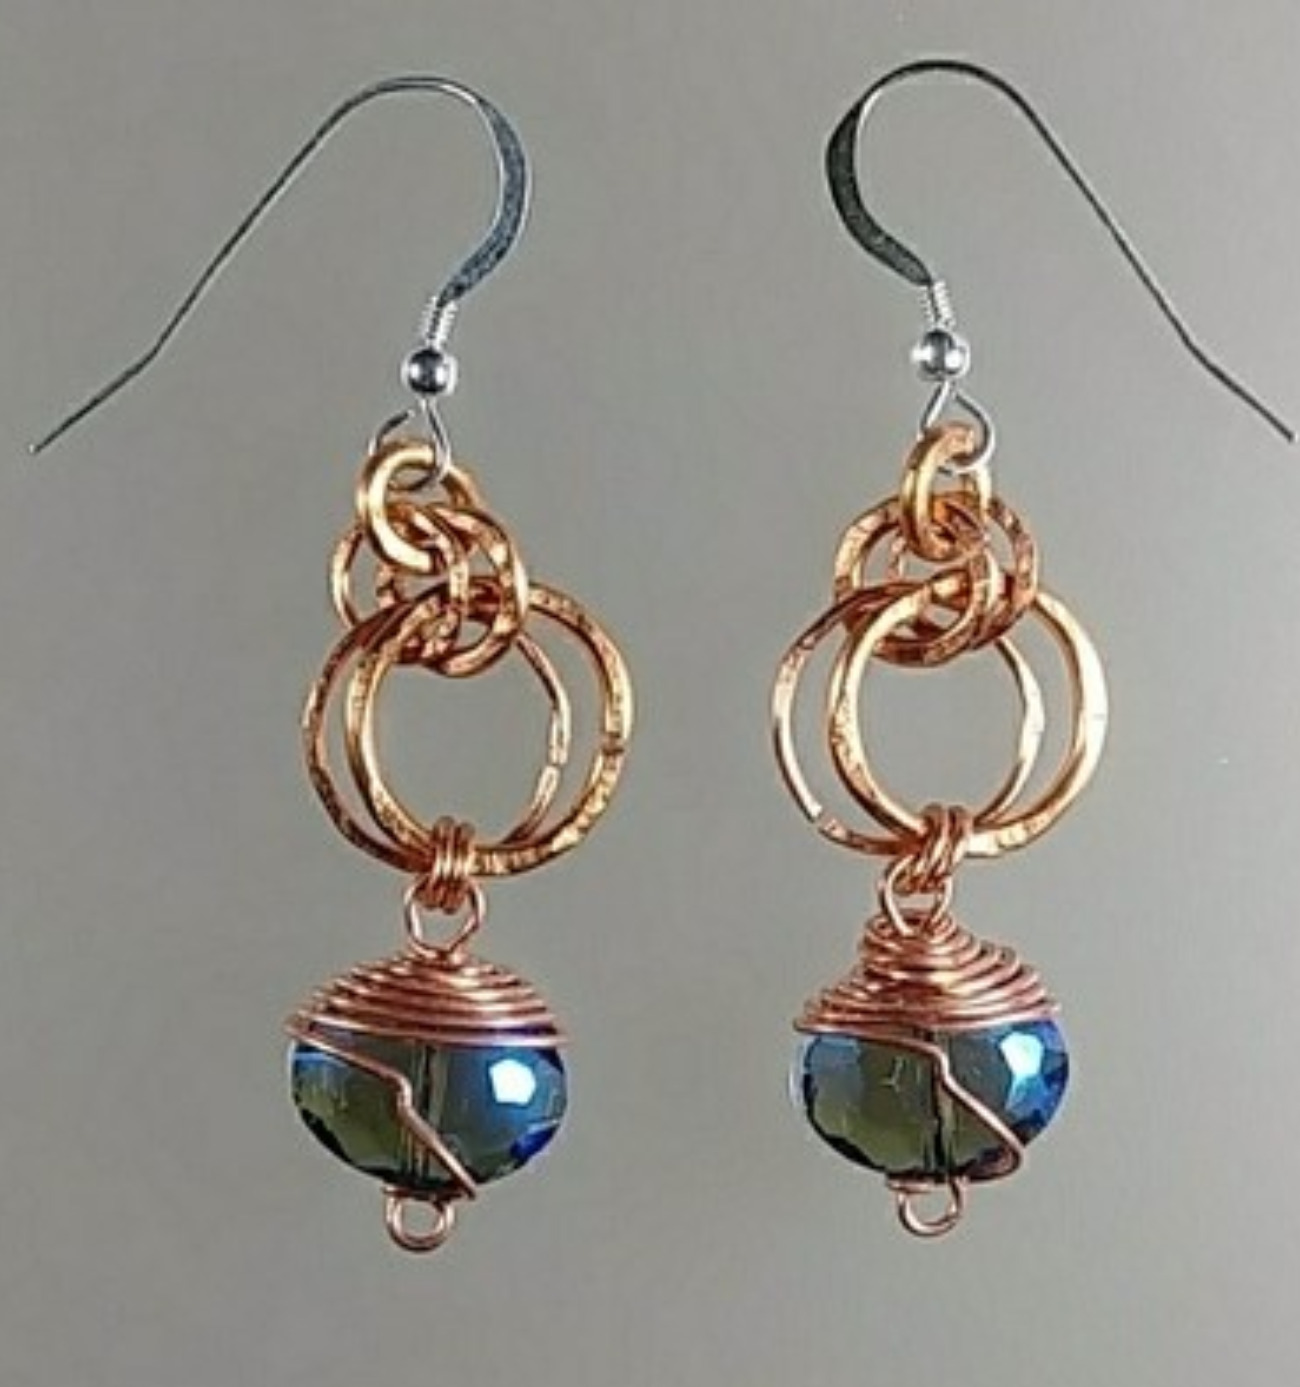 610 - EAR - Description: Earrings: Copper Wire, Faceted Glass Beads, Sterling Silver Earwire  Dimension: 2 ' L (Inches)